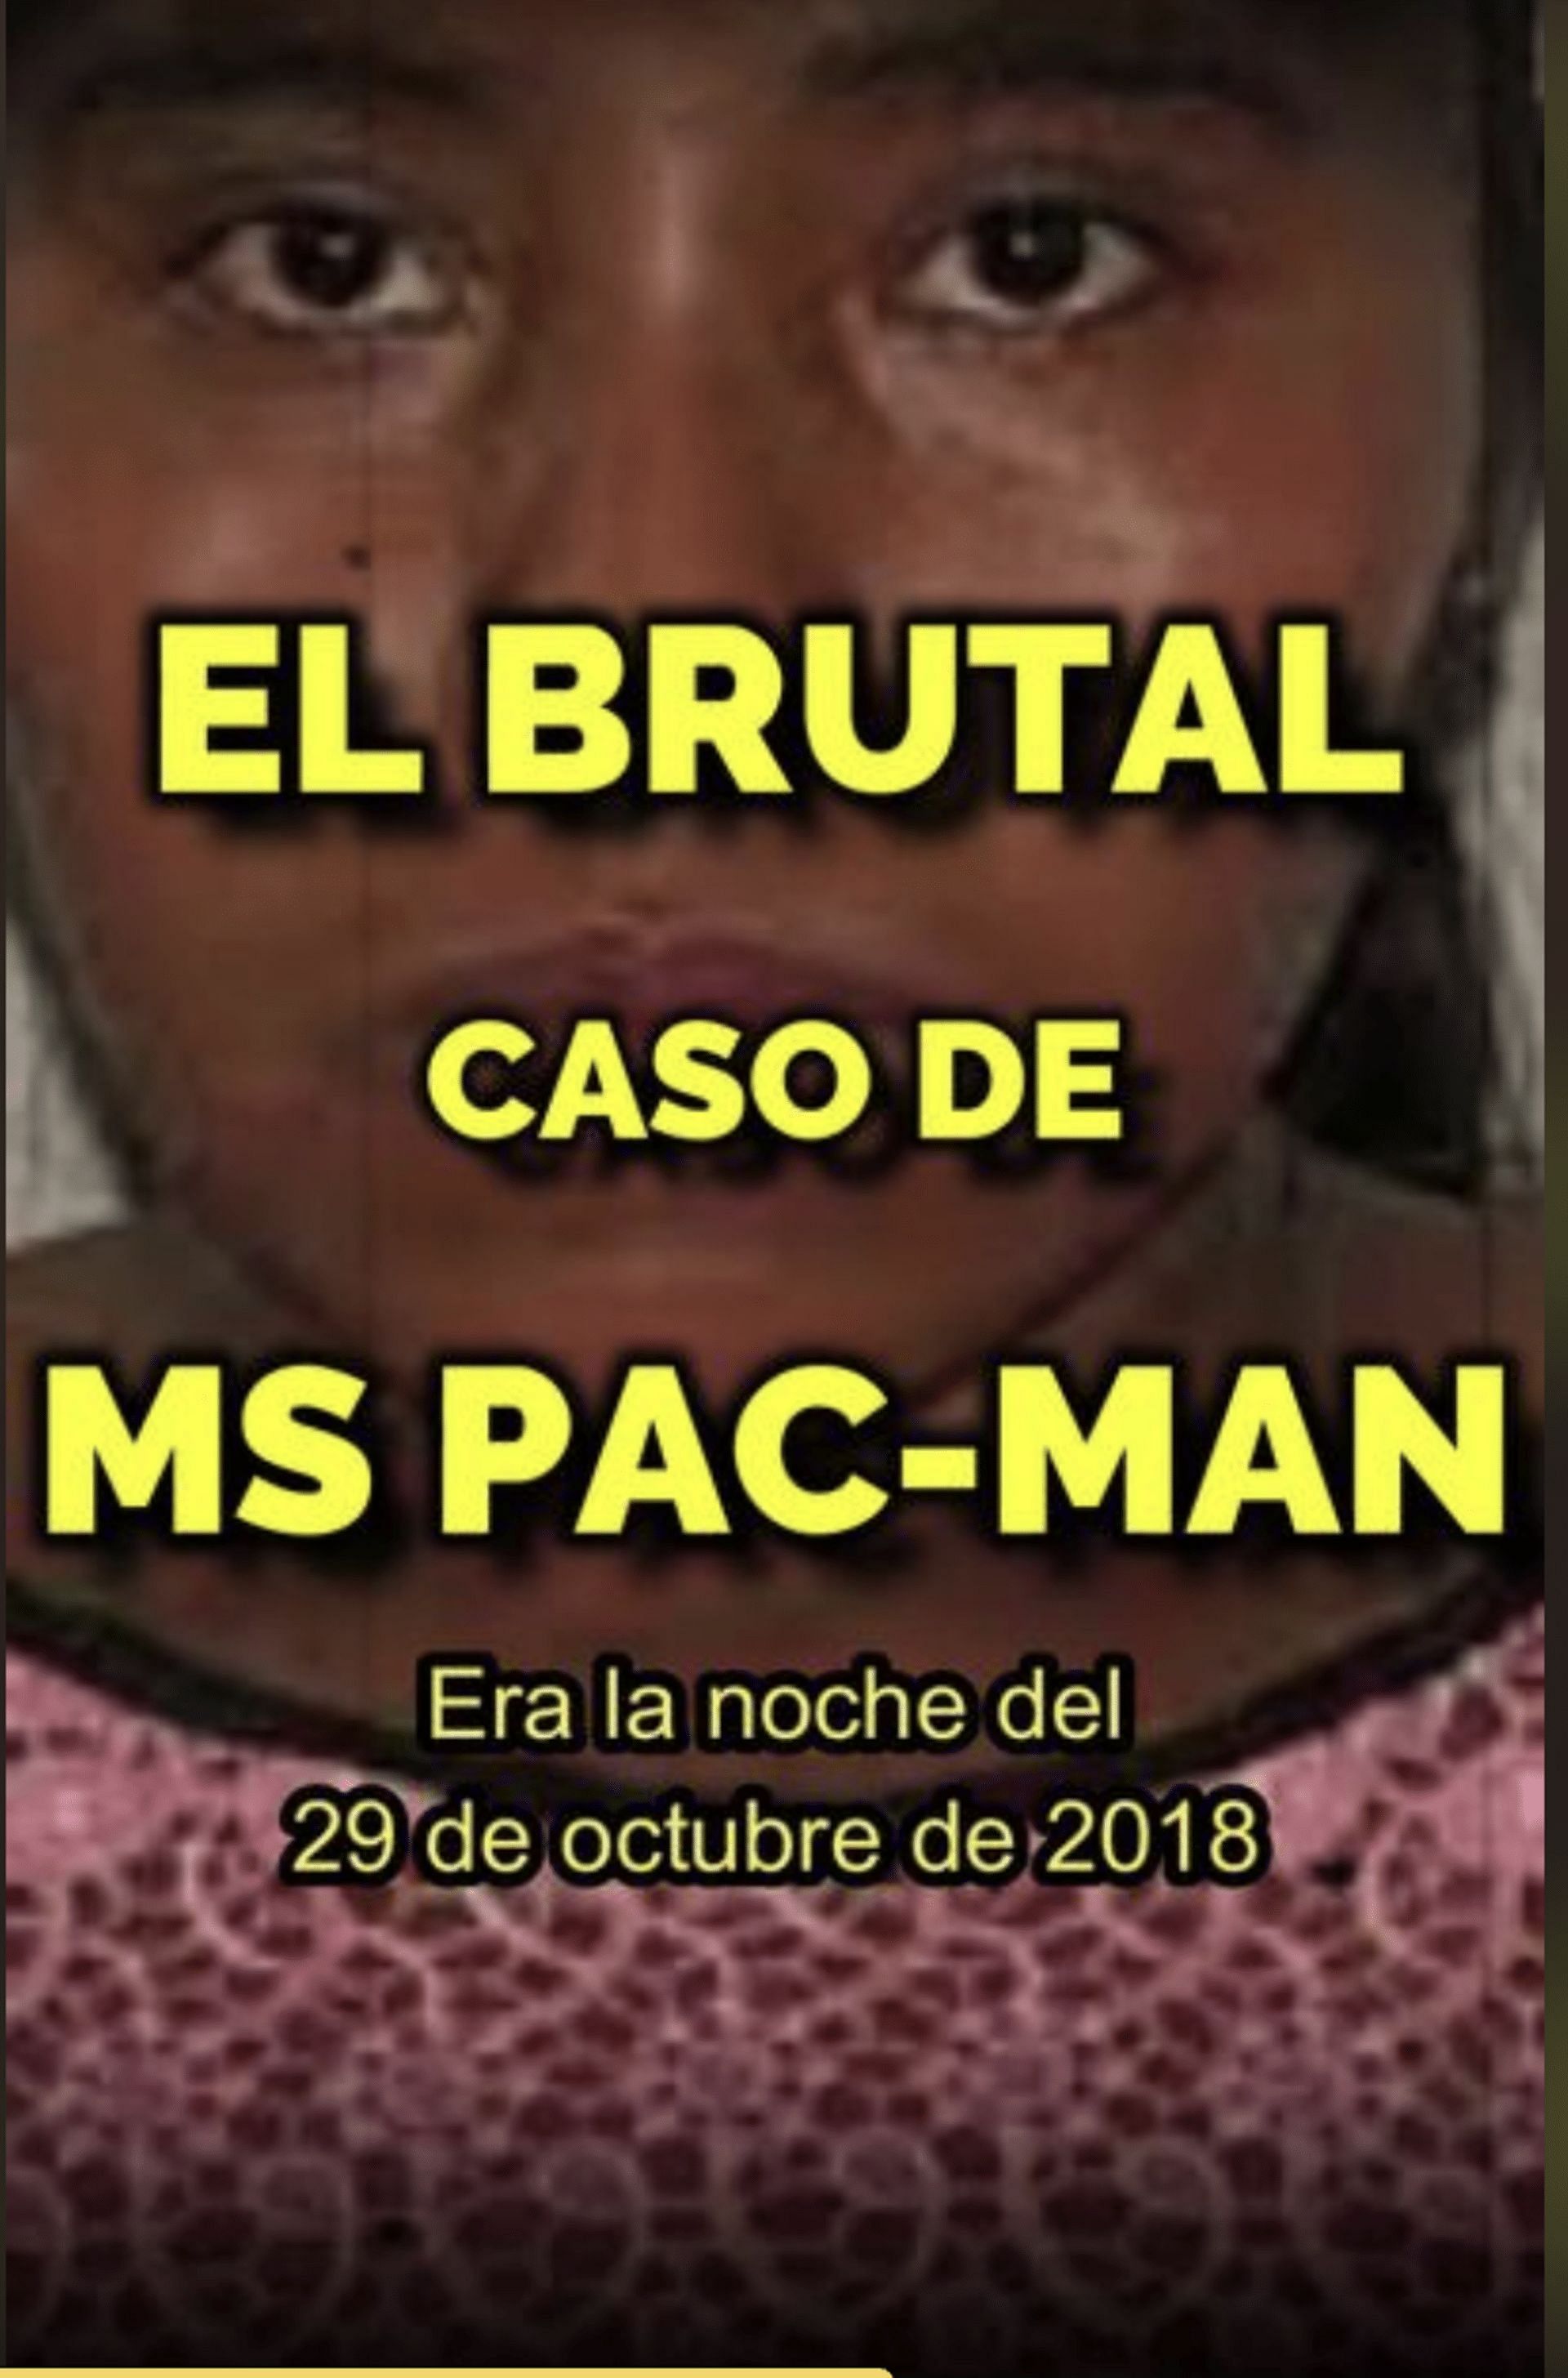 Ms pacman mujer